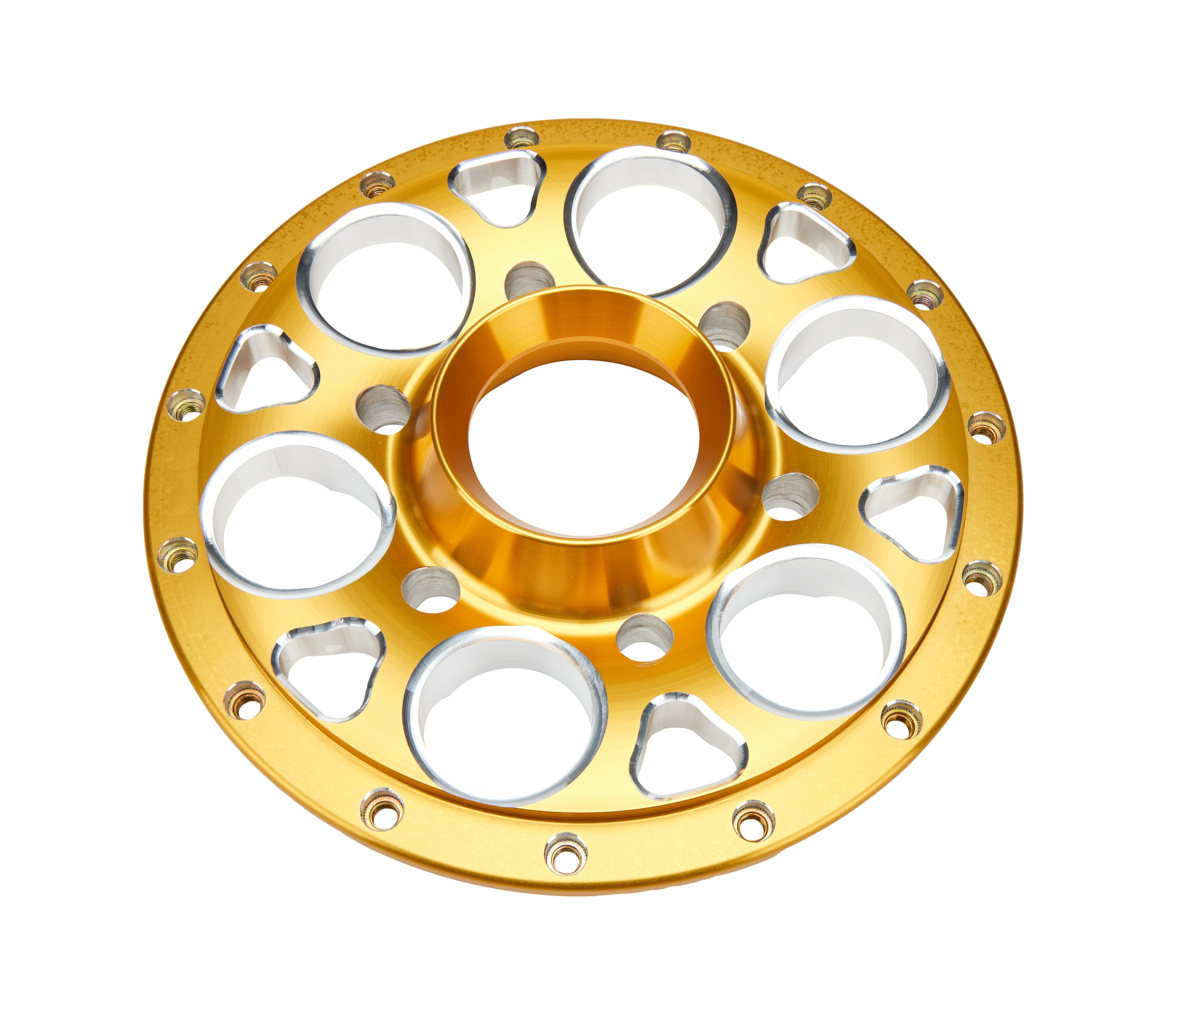 Weld Wheels P613-7094 Wheel Center Section, Magnum 6-Pin, Lug Mount Center, Aluminum, Gold Anodized, 15 in Wheels, Each